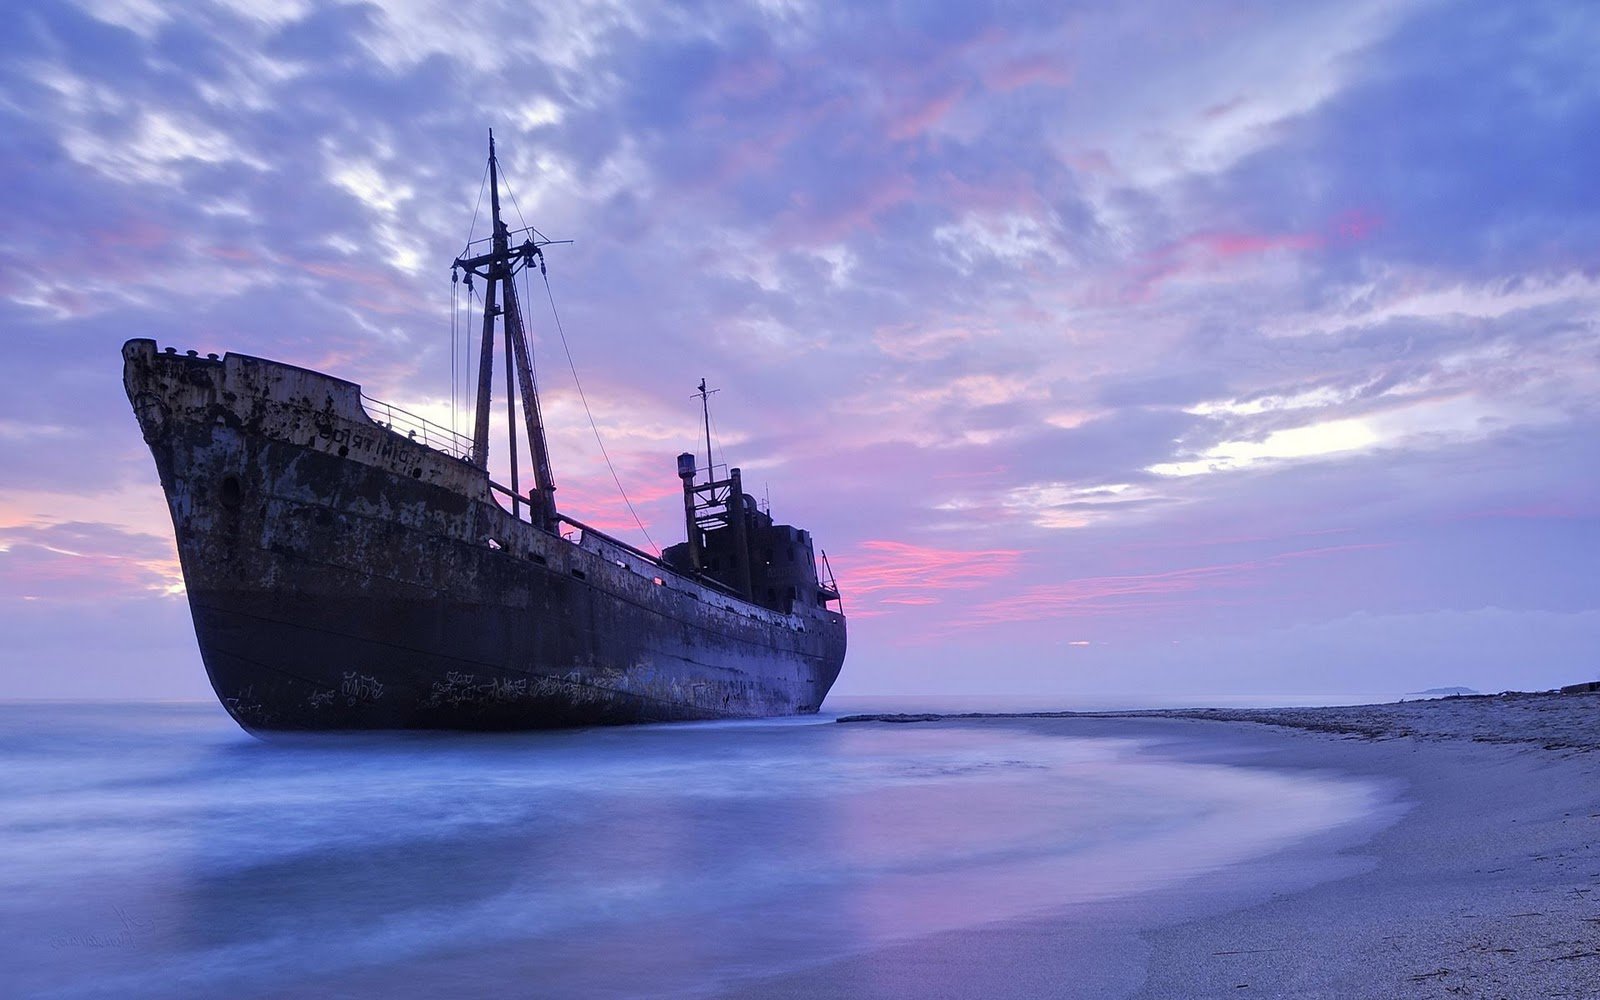 Ship Wallpaper Images in HD Available Here For Free Download